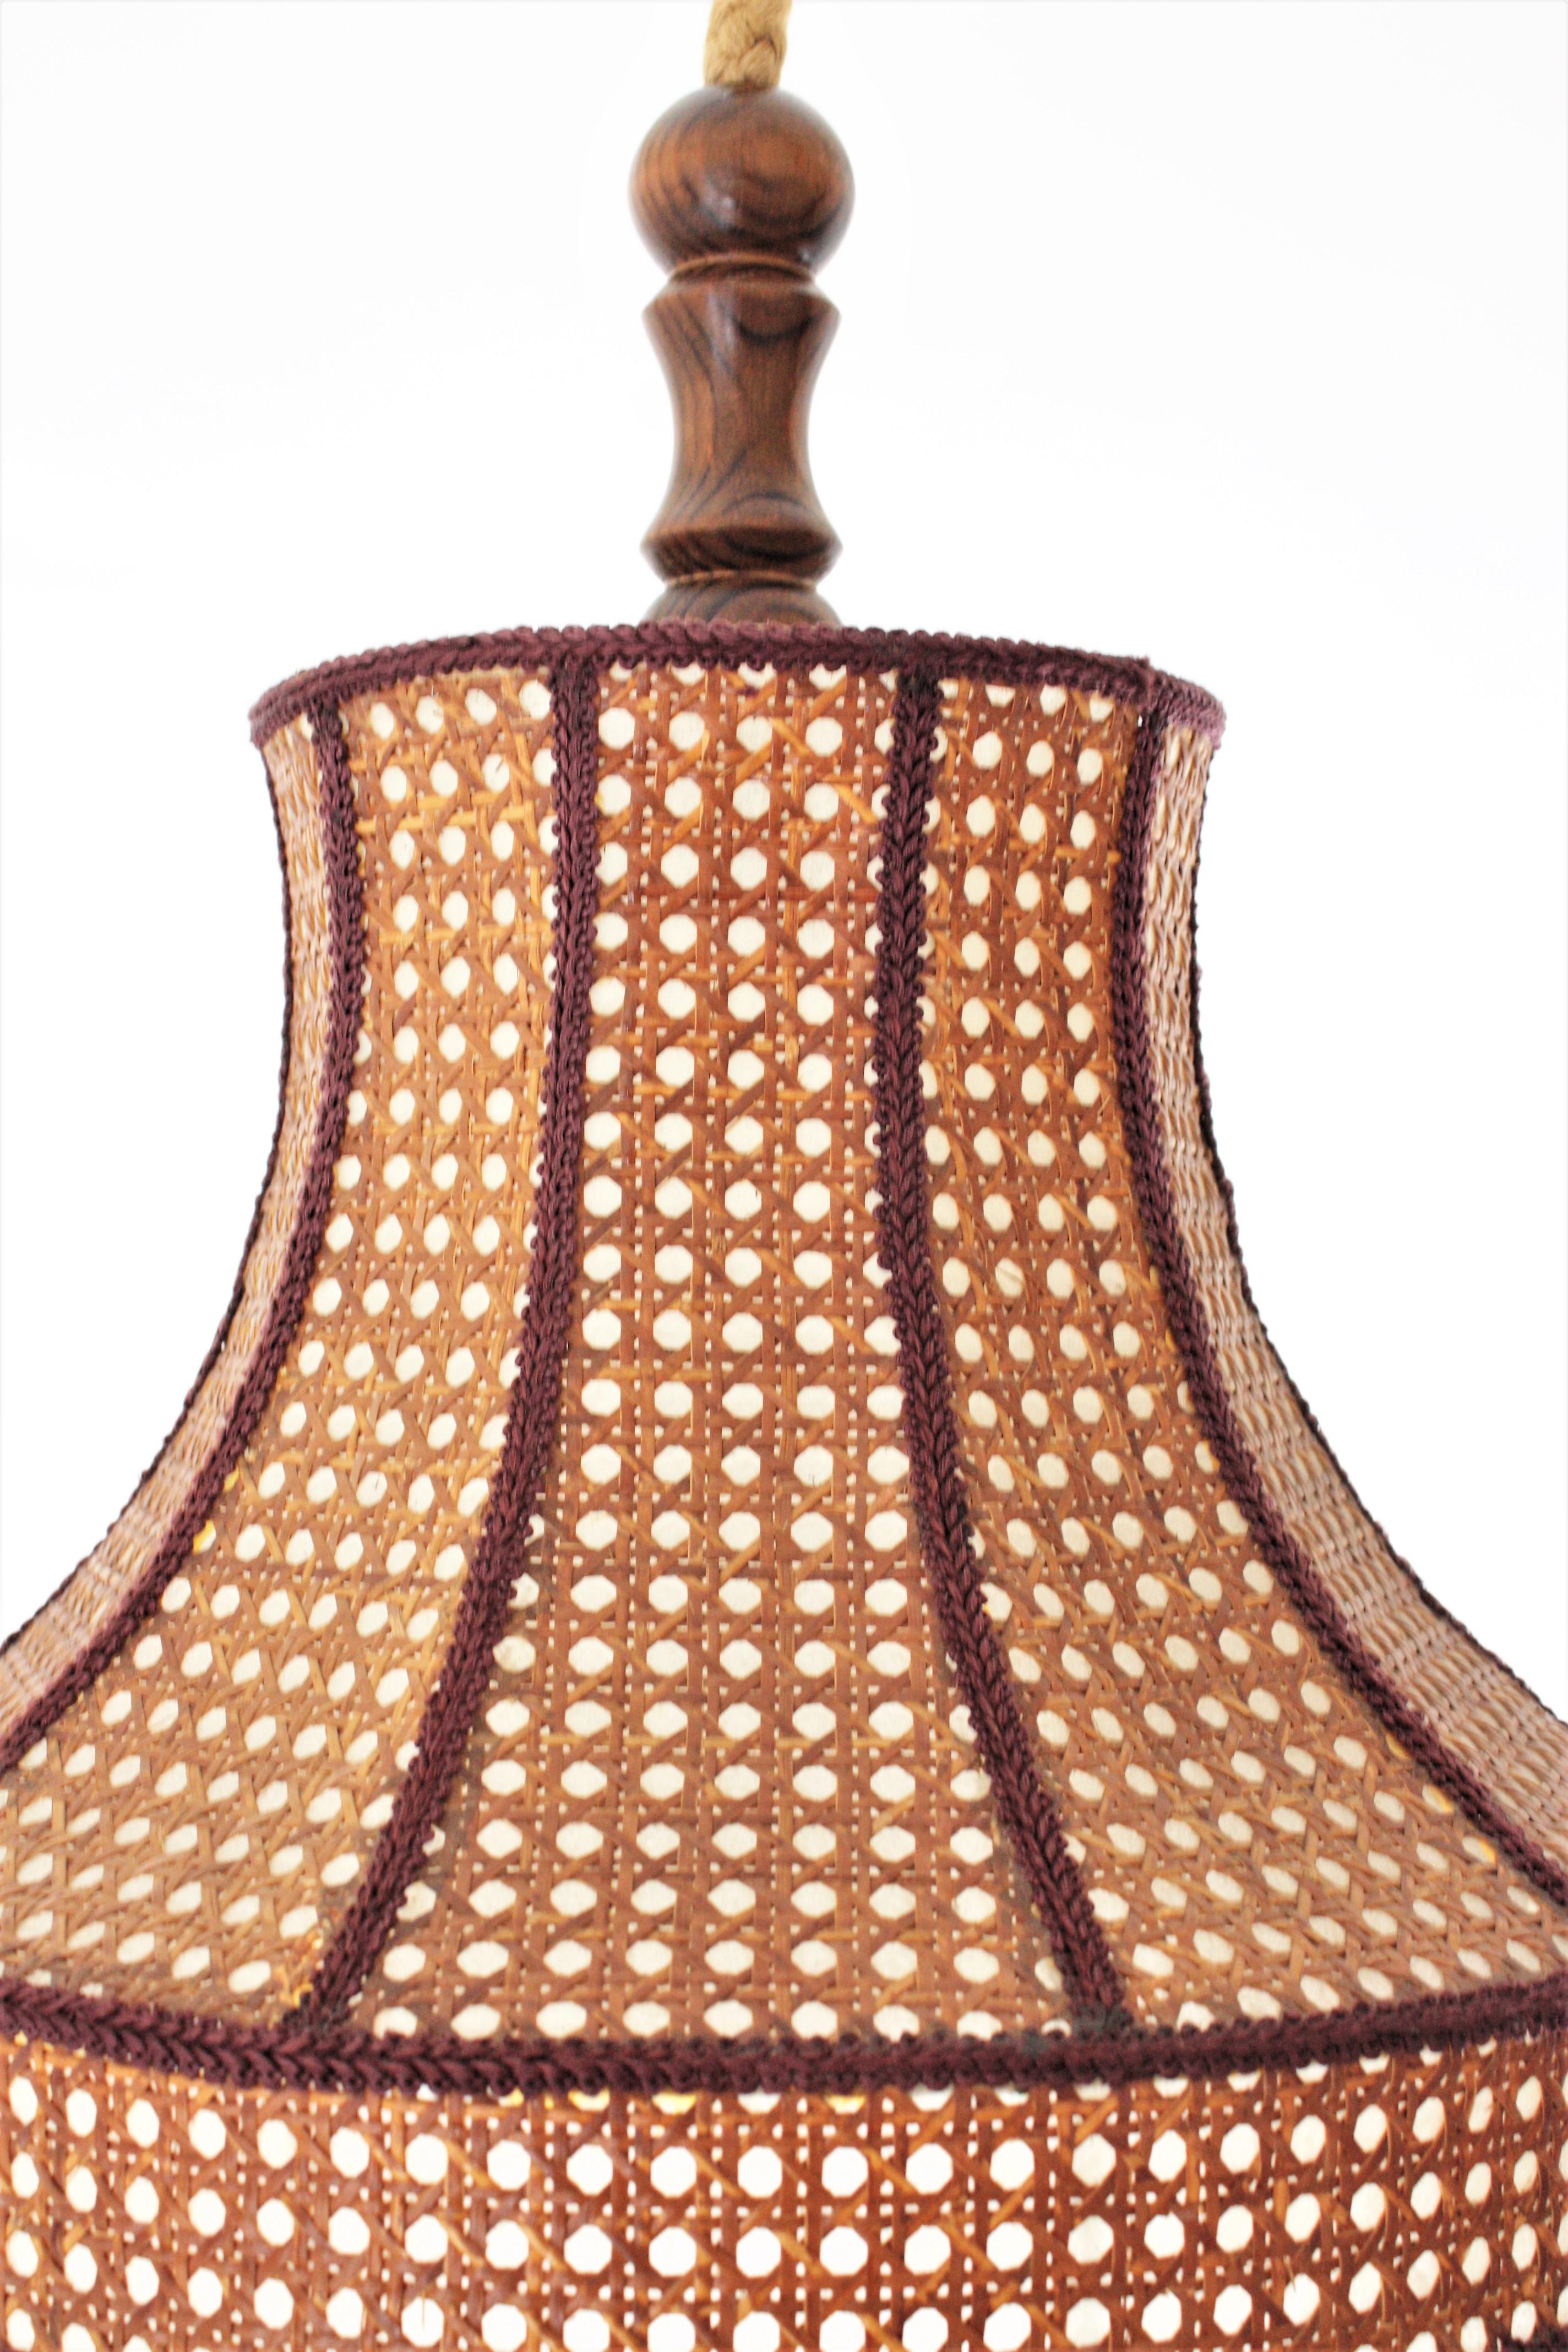 Rattan Wicker Pendant Hanging Lamp with Pagoda Shape and Fringed Bottom 5